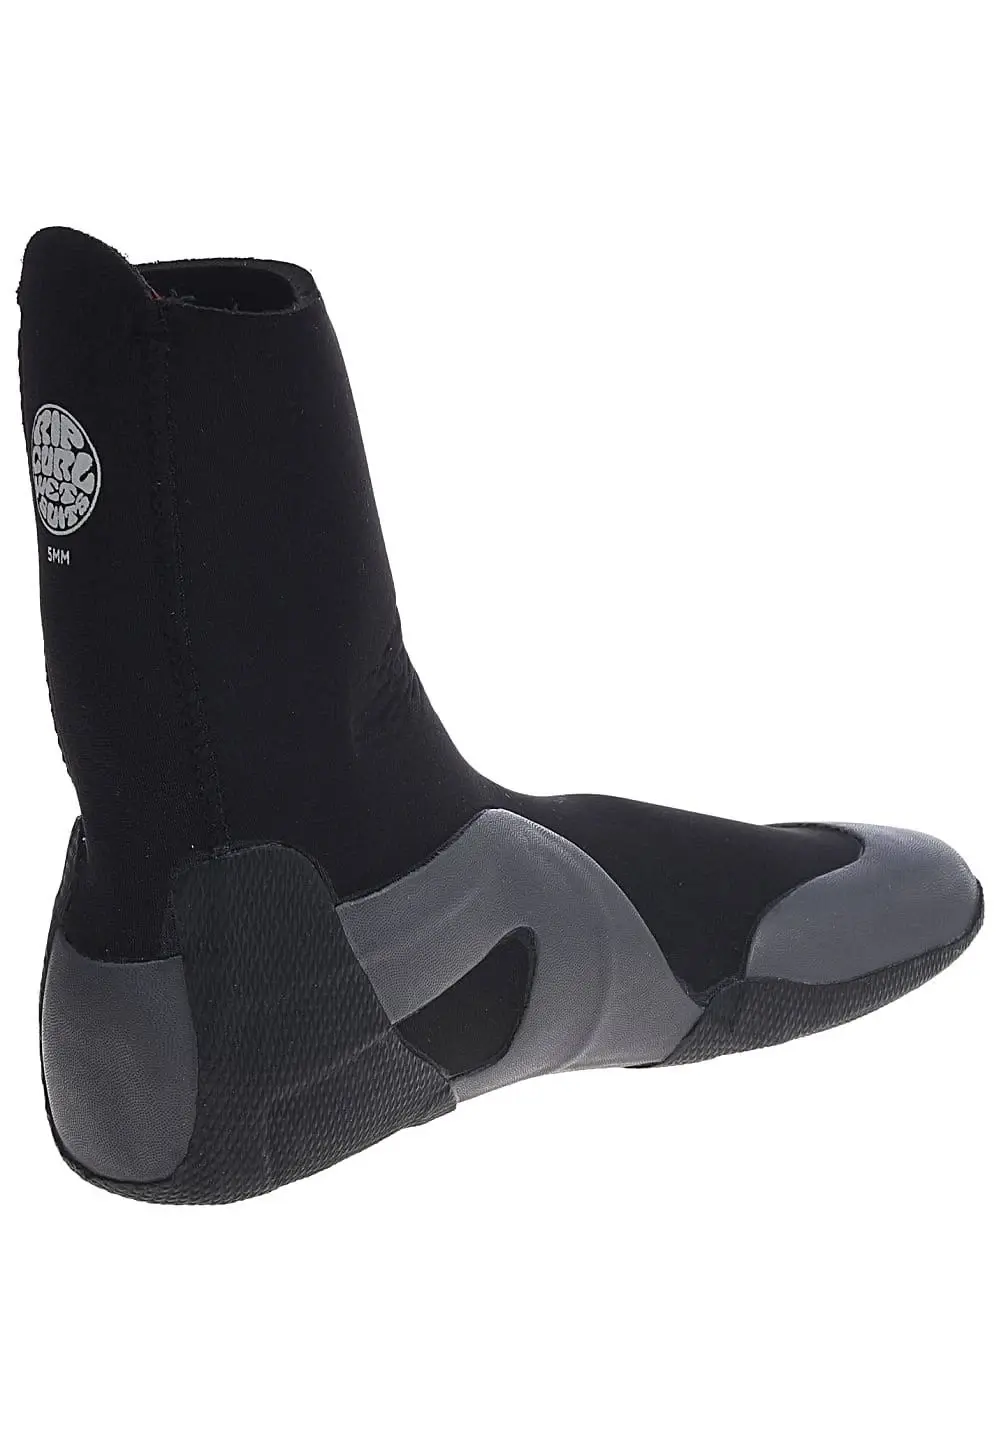 Rip Curl Dawn Patrol 5mm Round Toe Wetsuit Boots - Black